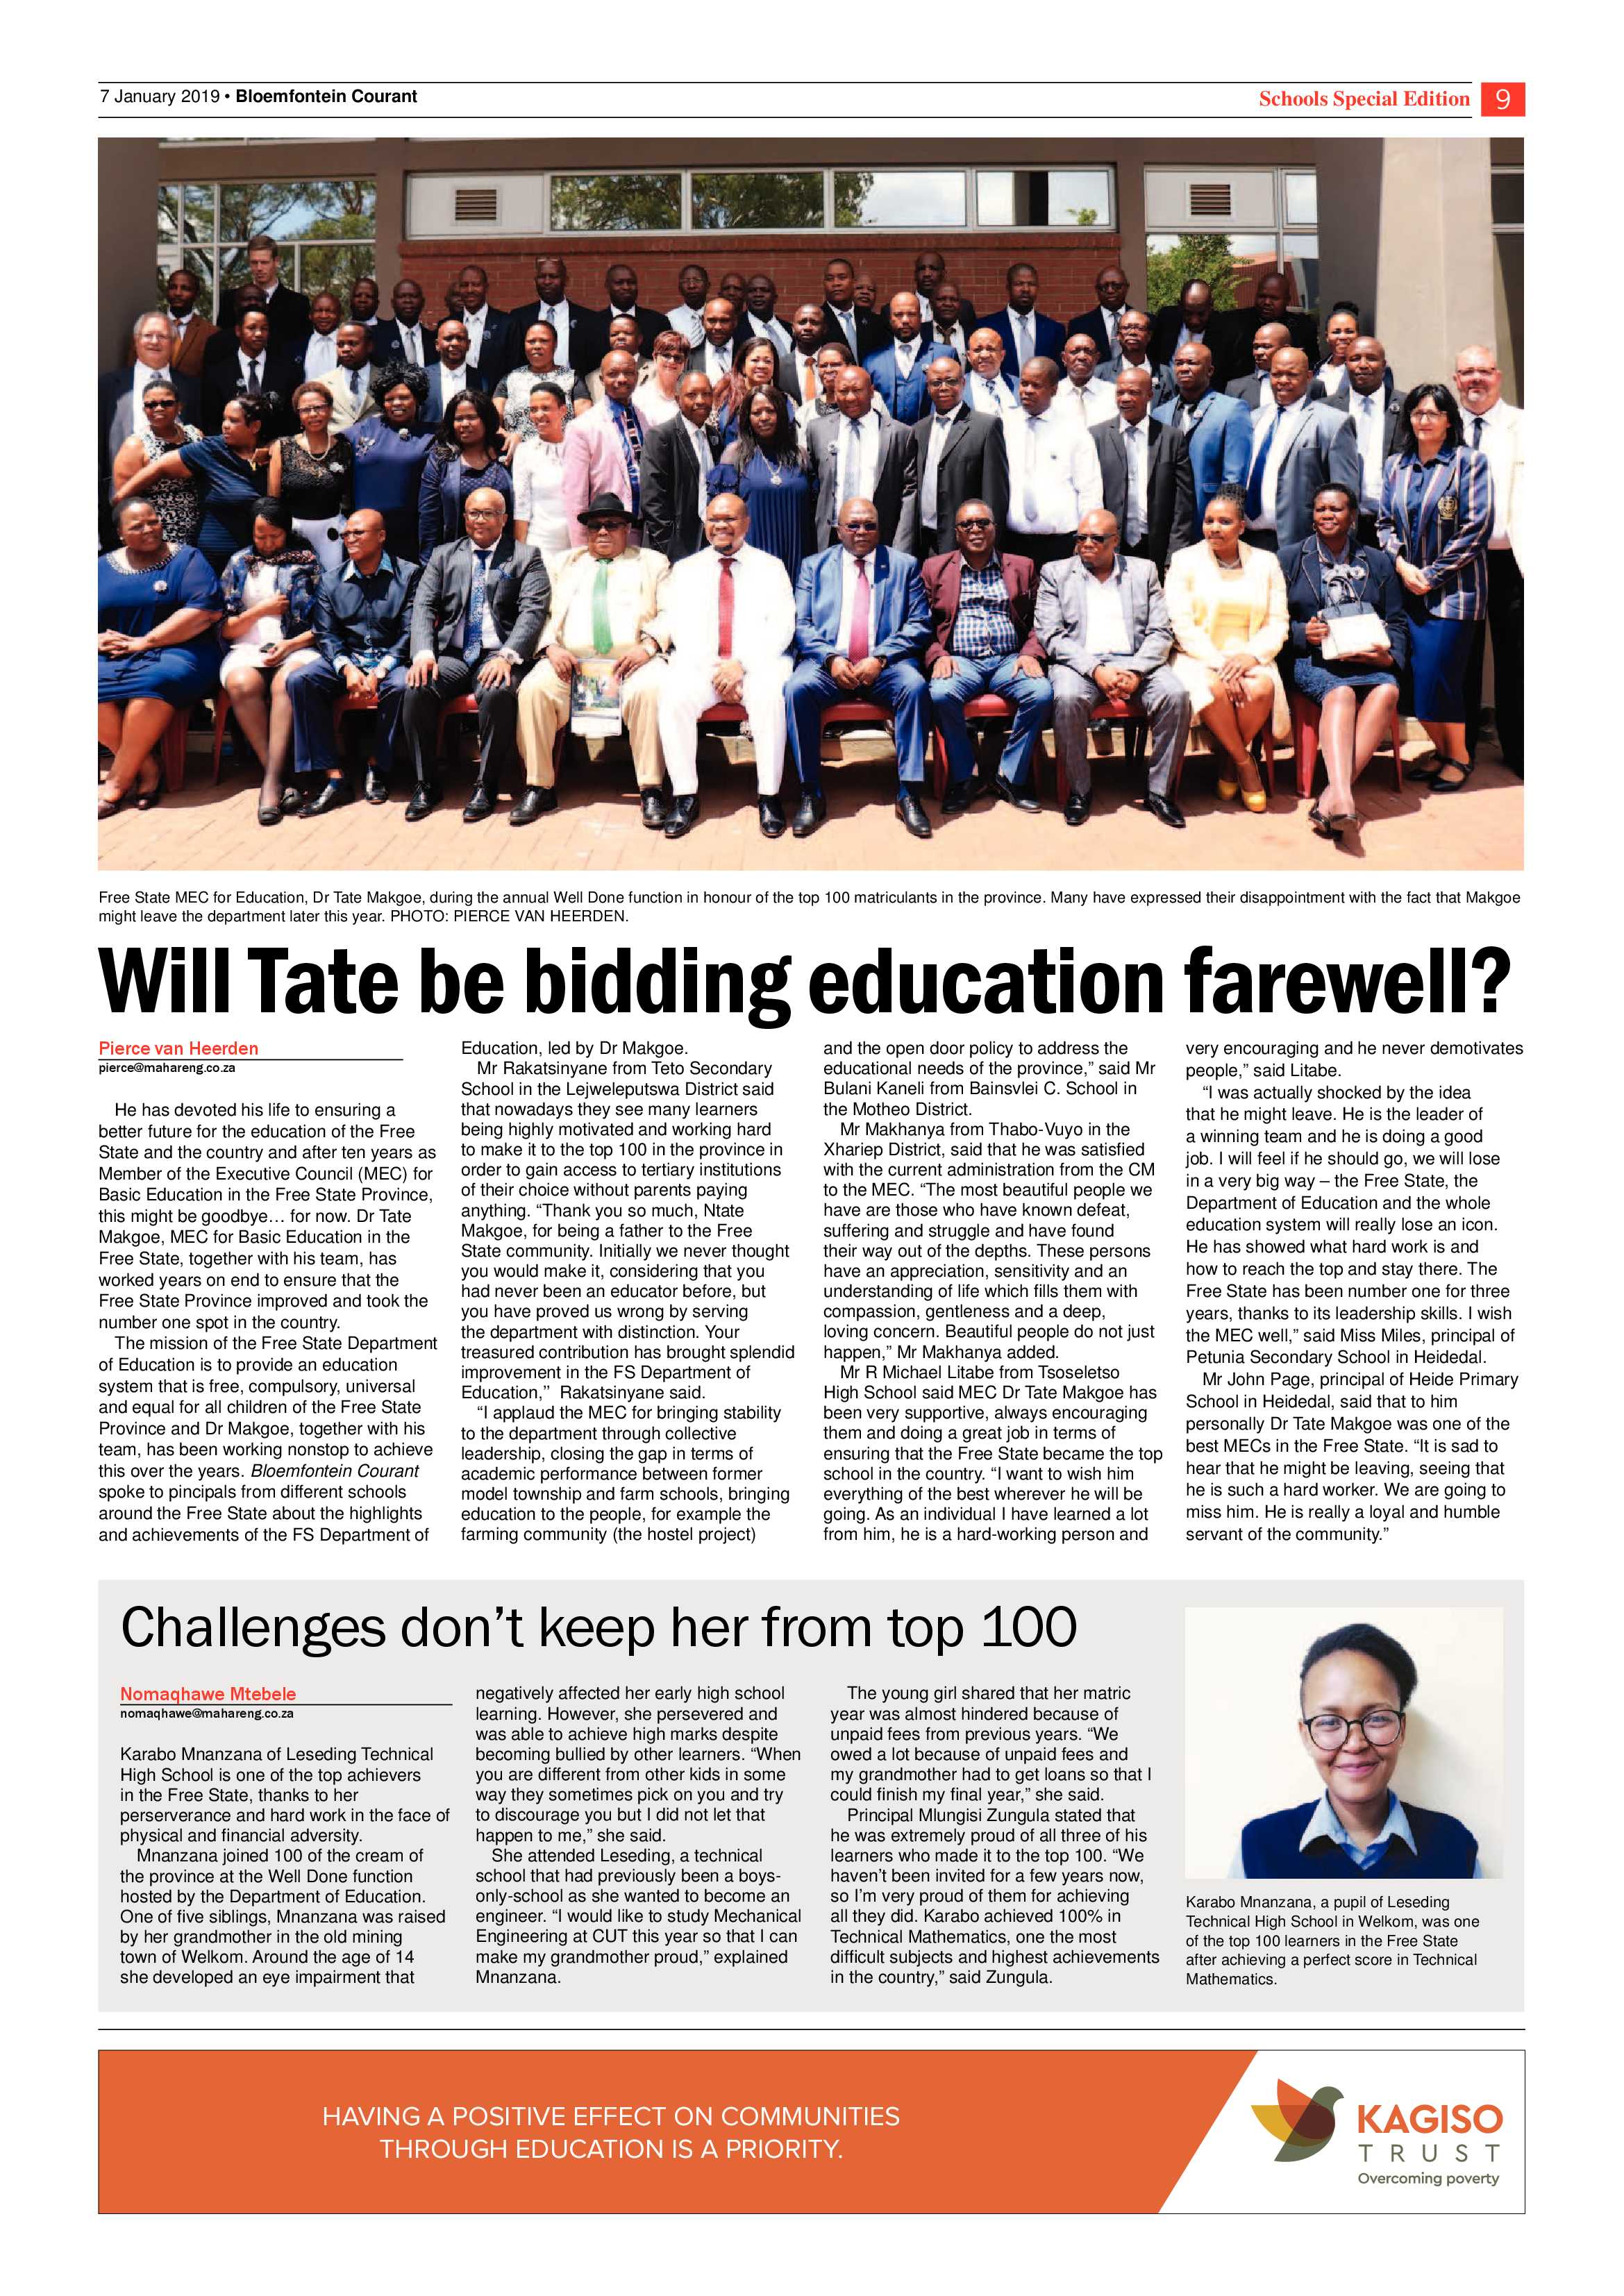 courant-school-edition-07-january-2019-epapers-page-9